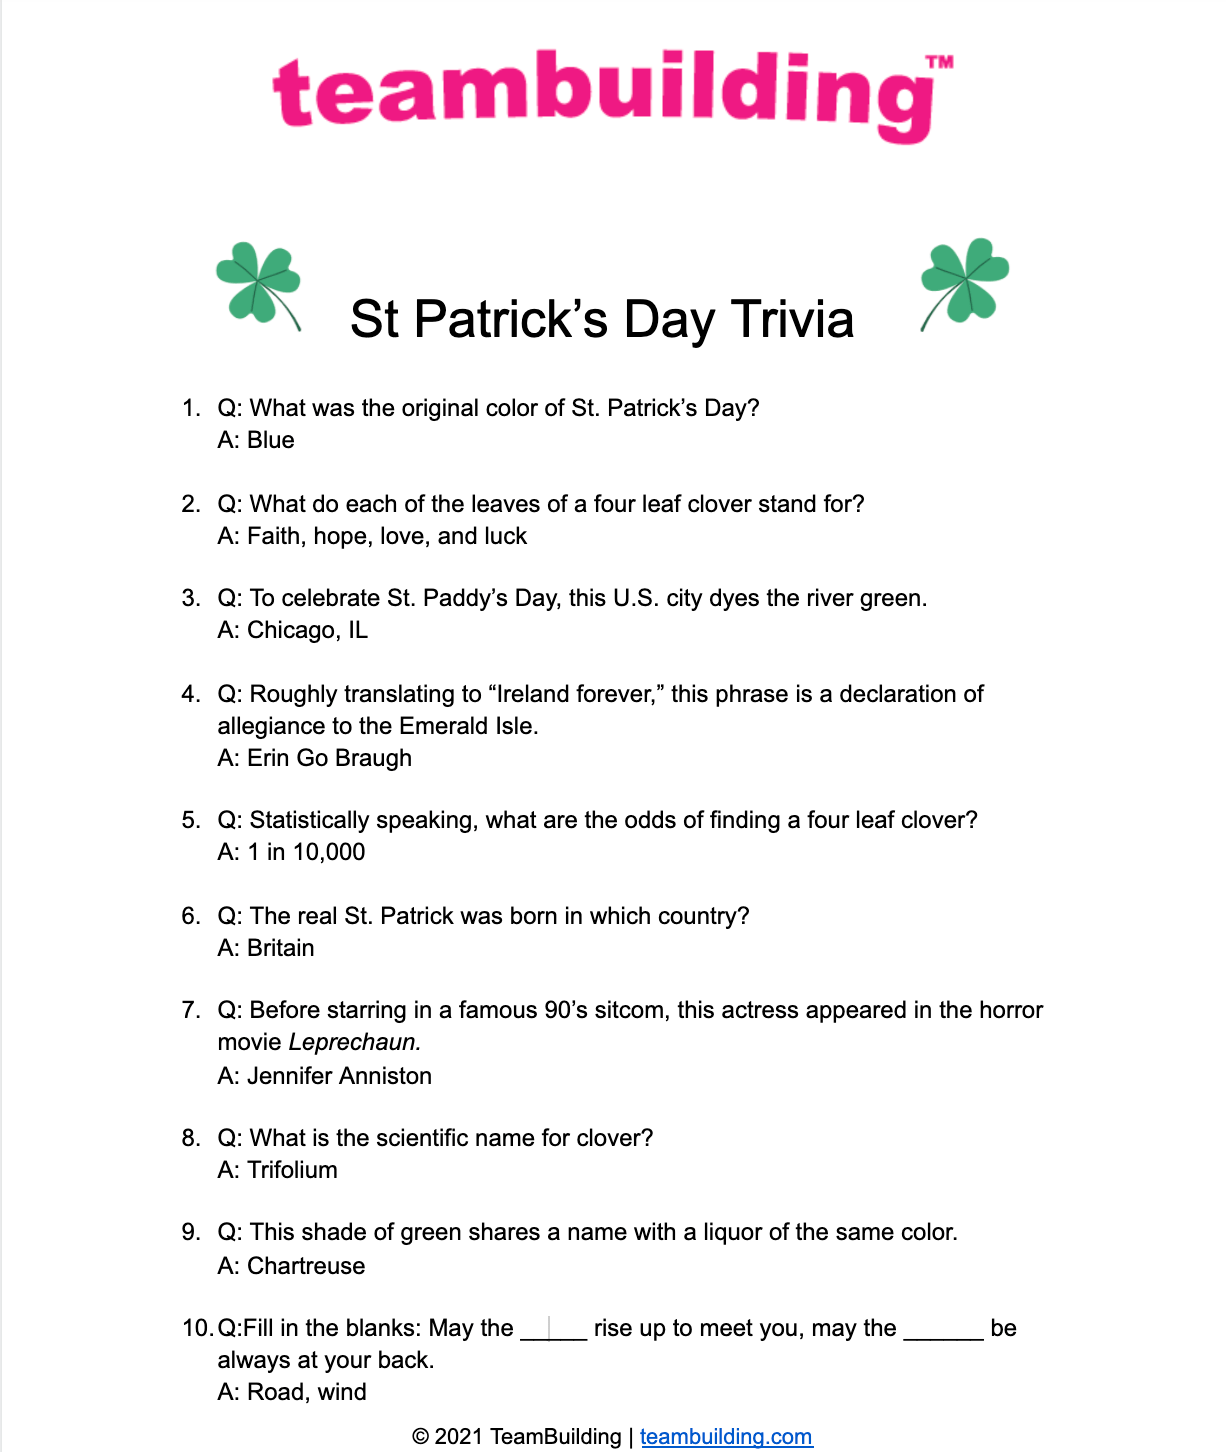 St. Patrick's Day trivia questions